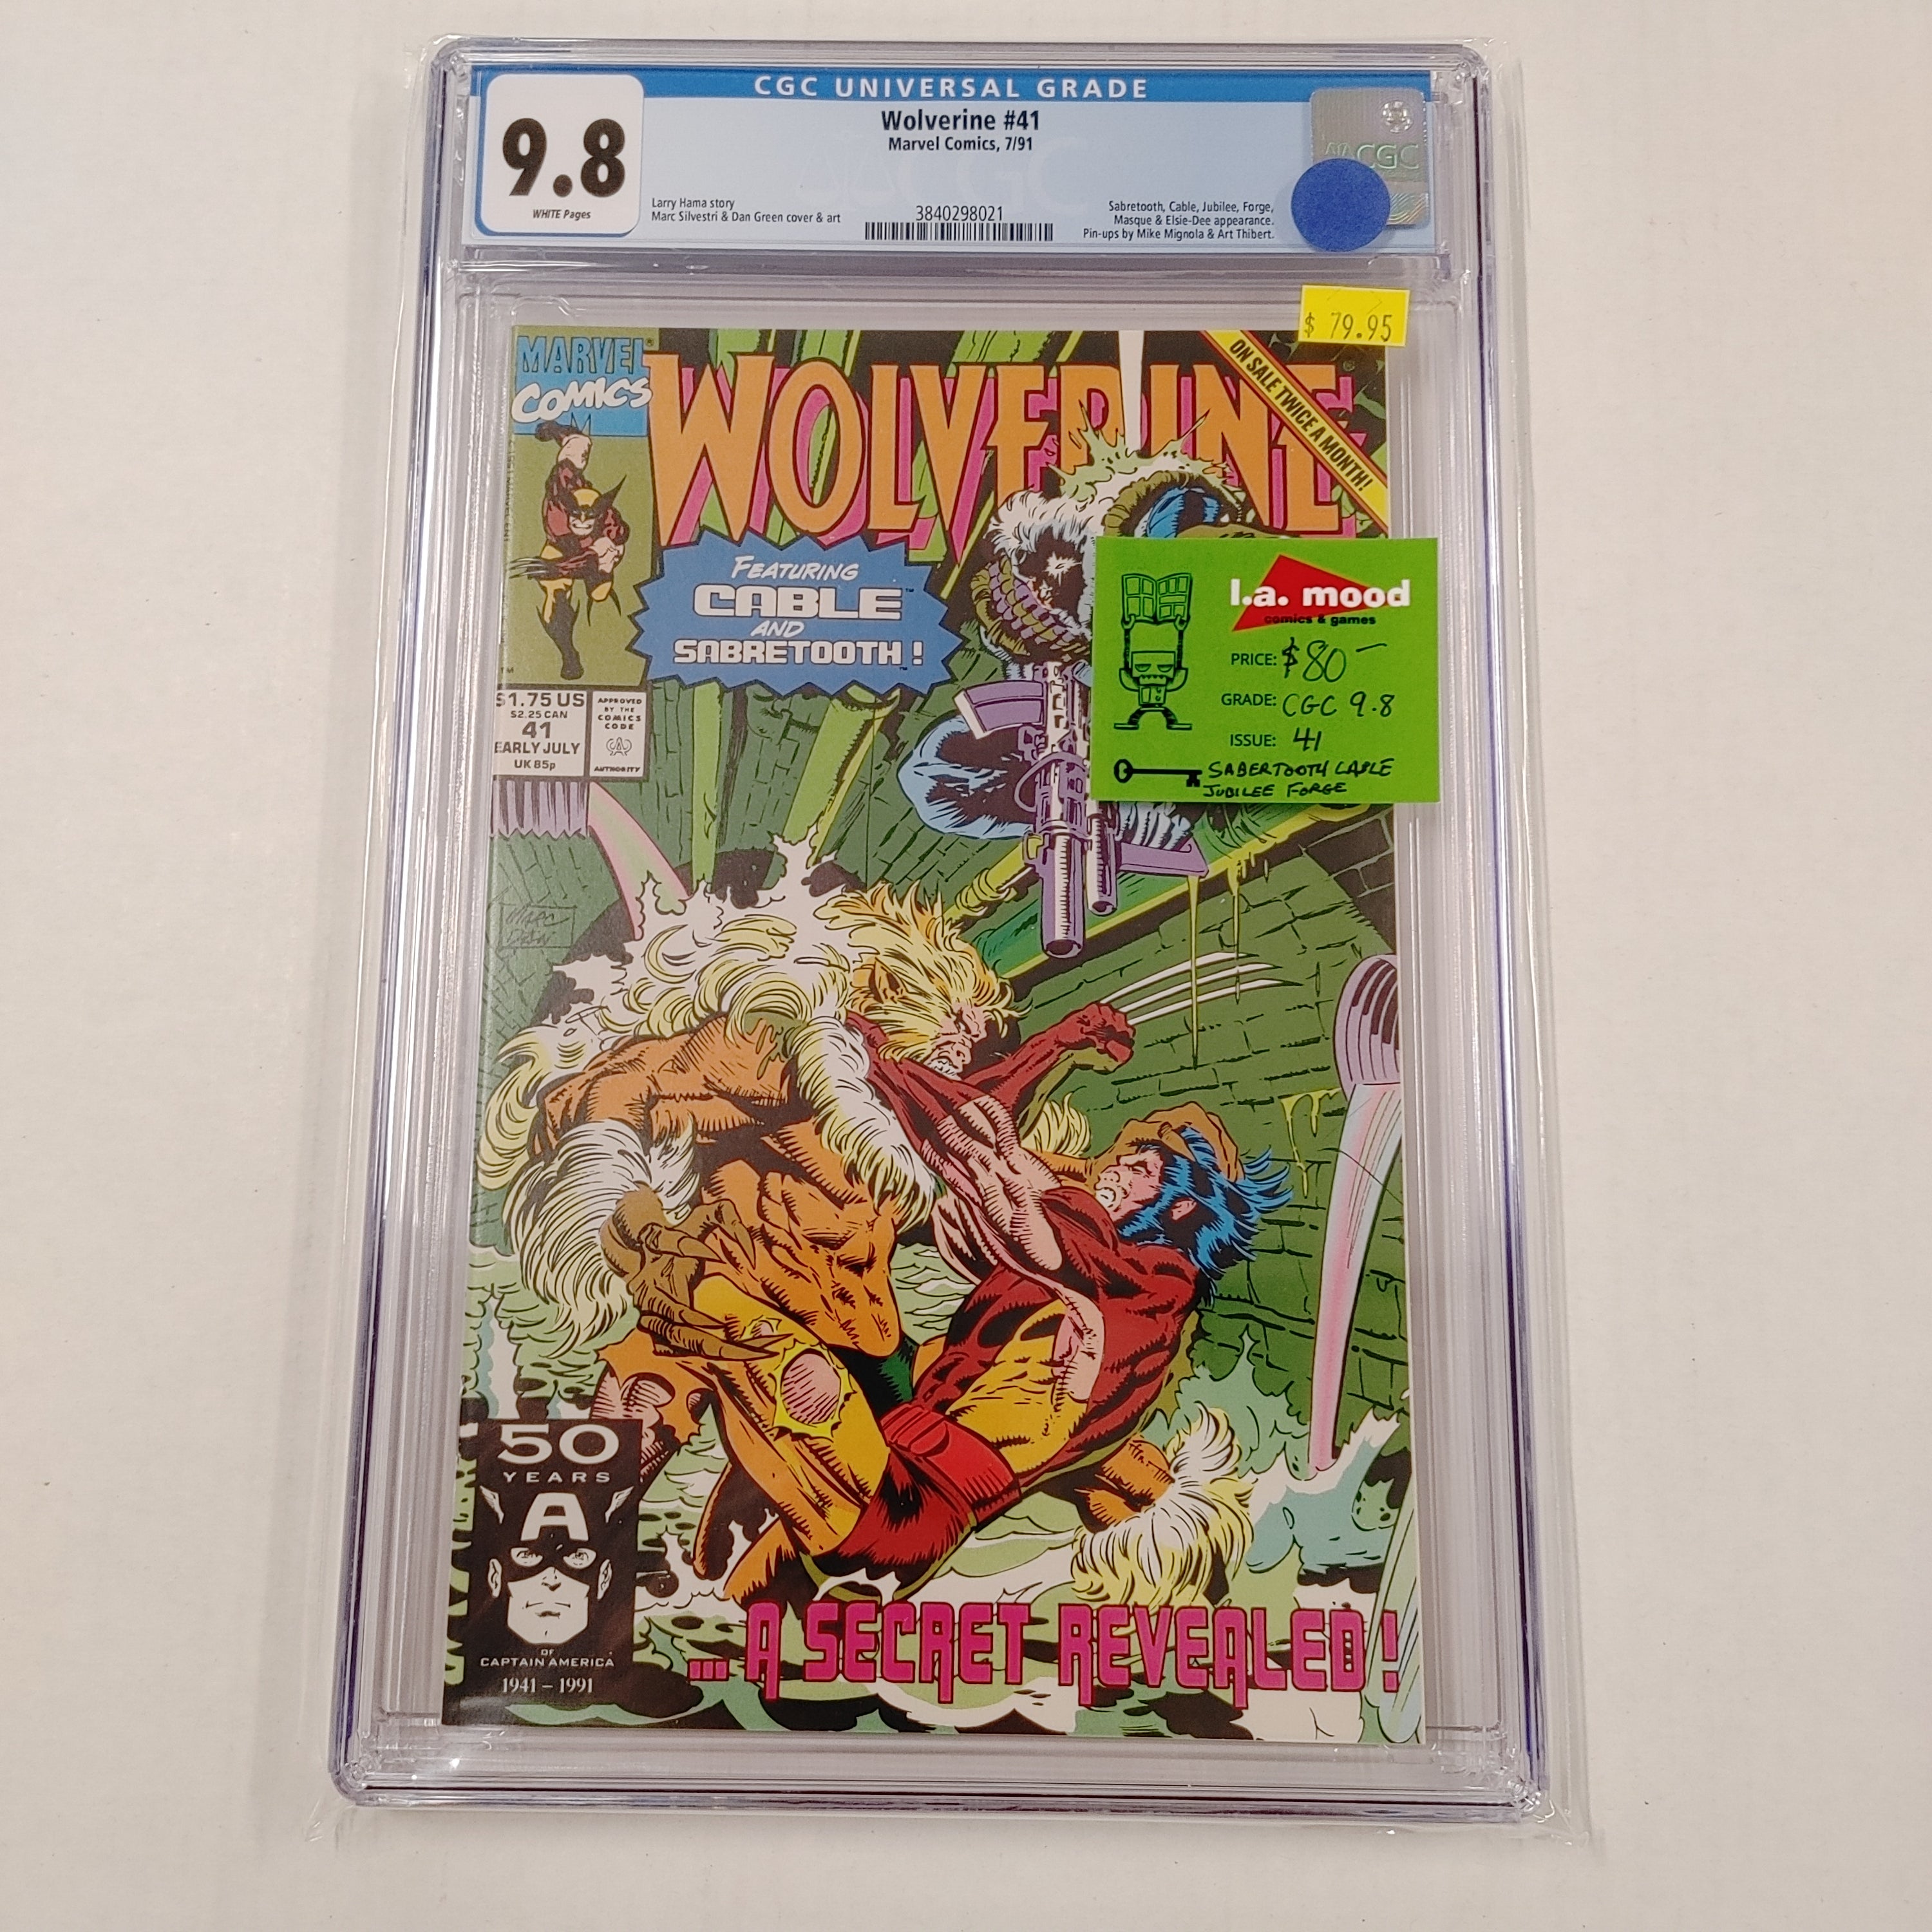 Wolverine #41 CGC 9.8 | L.A. Mood Comics and Games